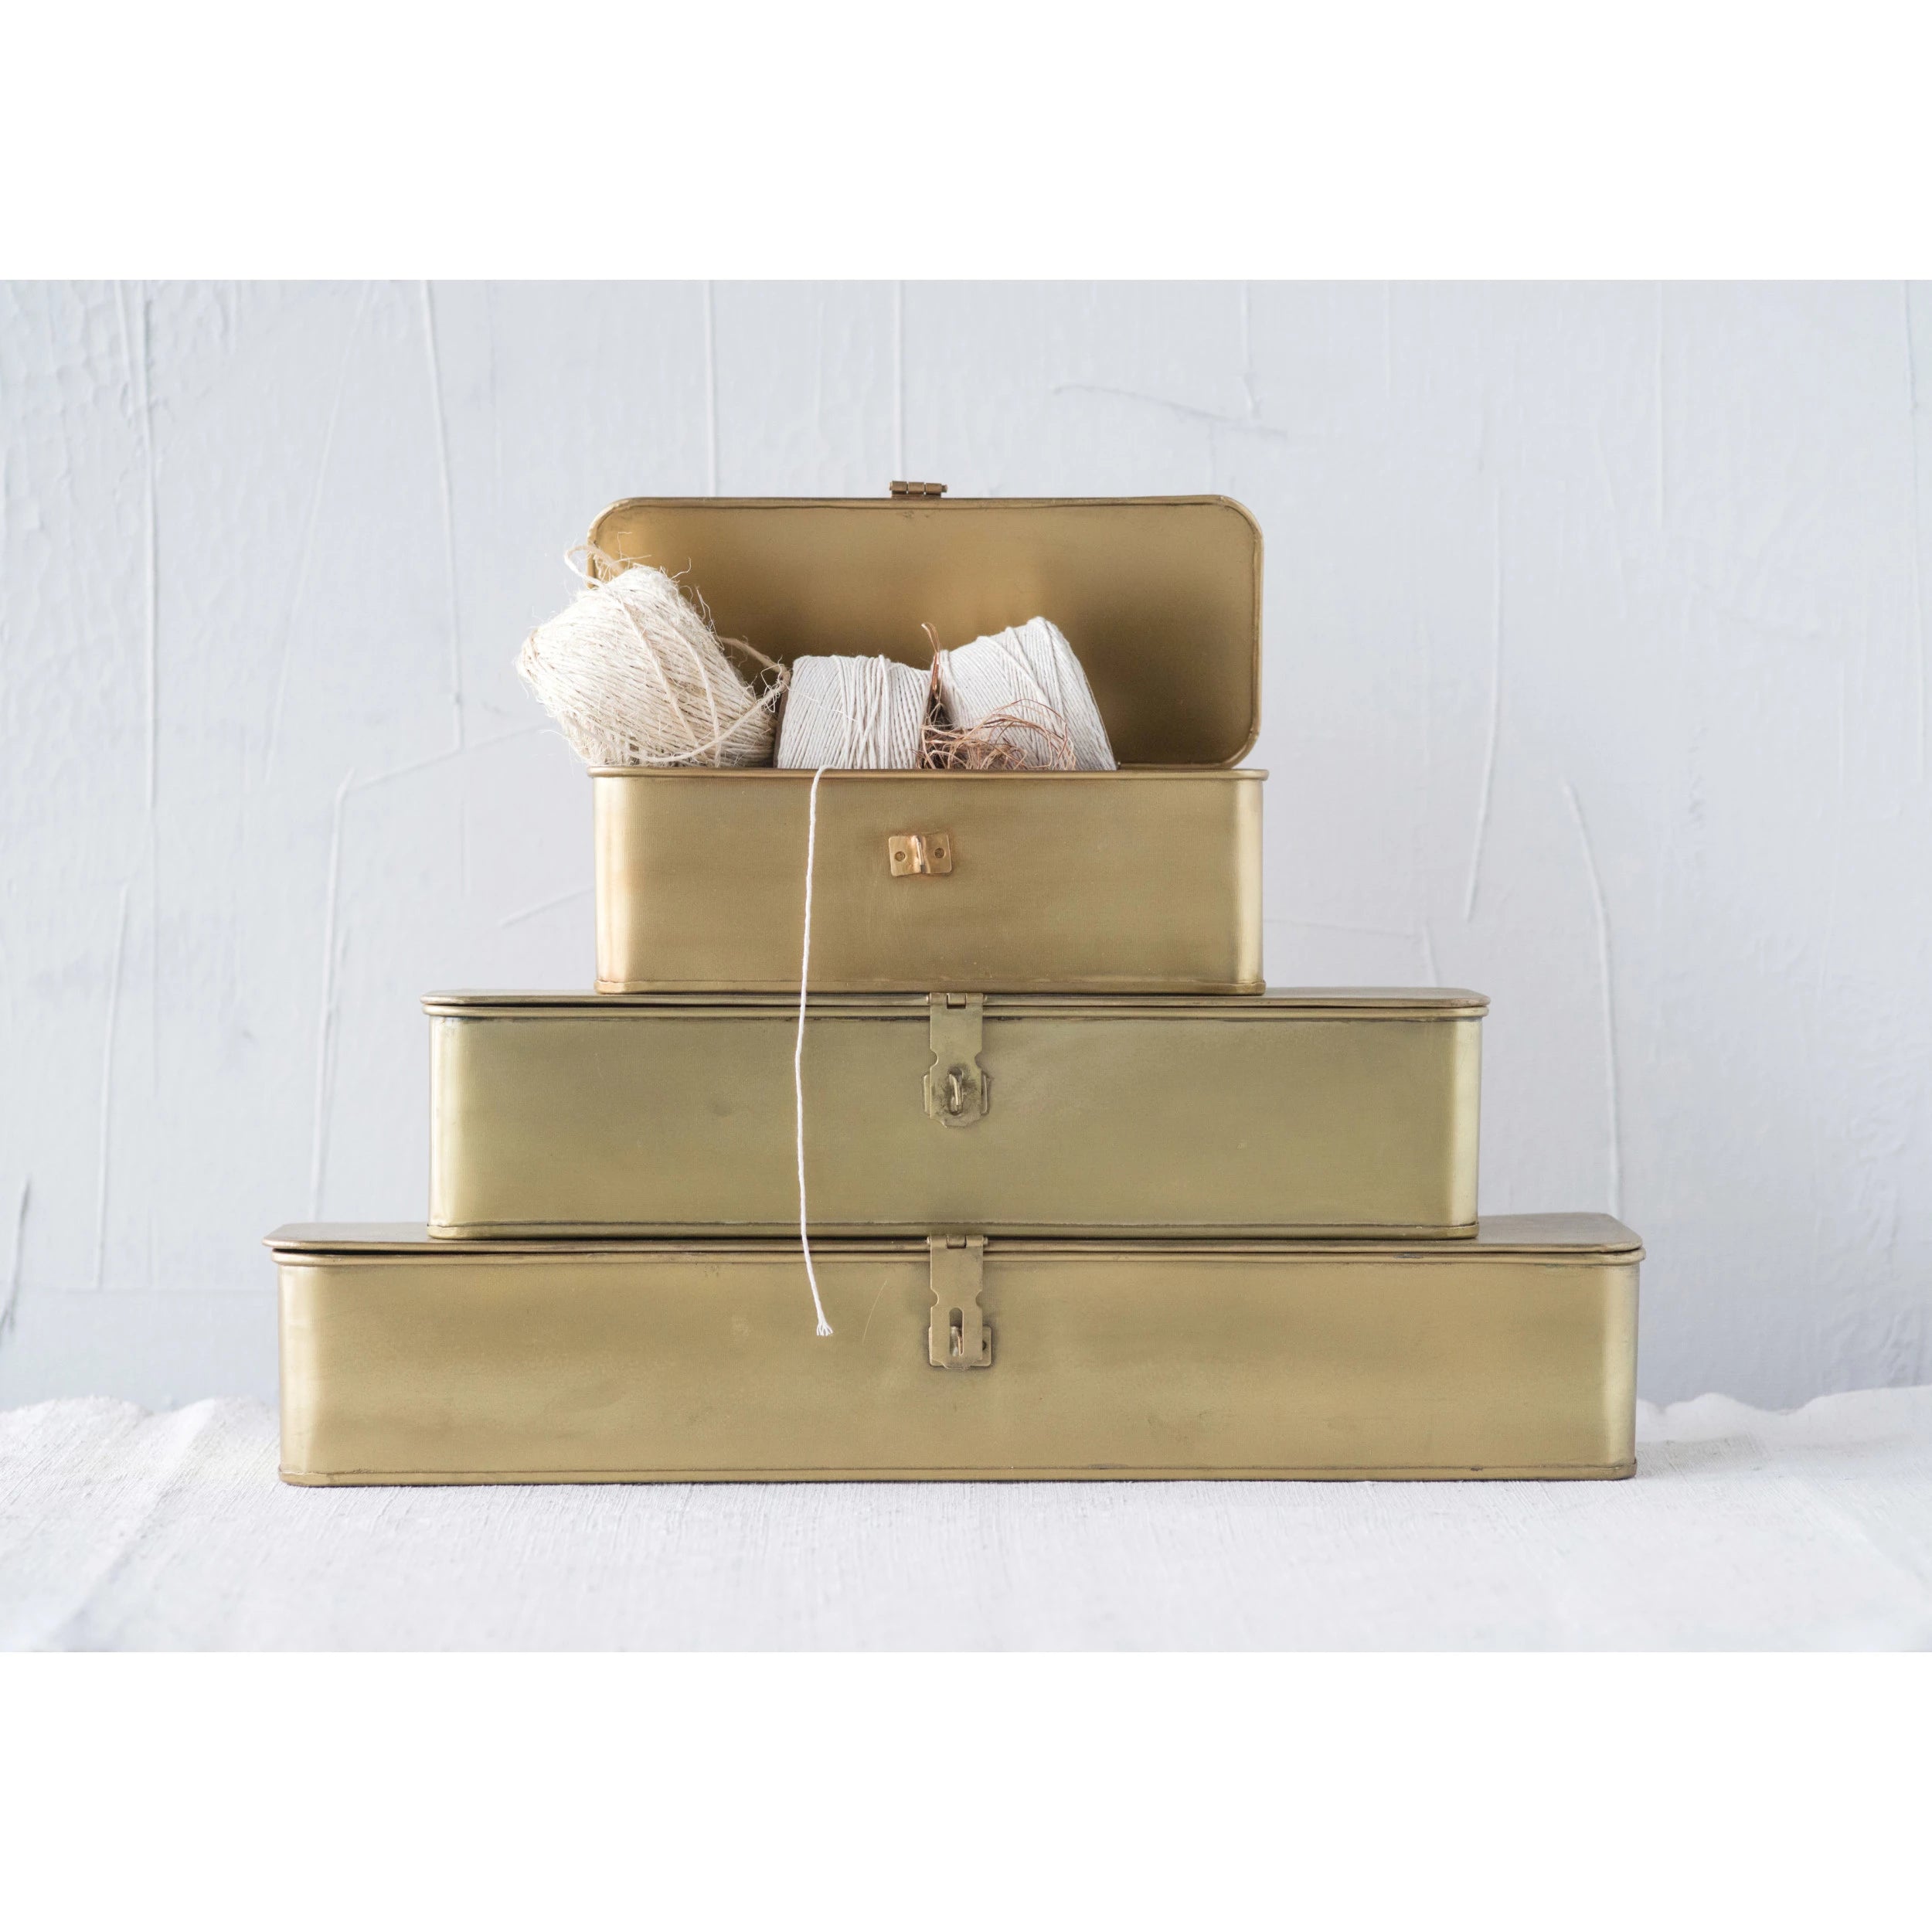 Decorative Metal Boxes with Gold Finish